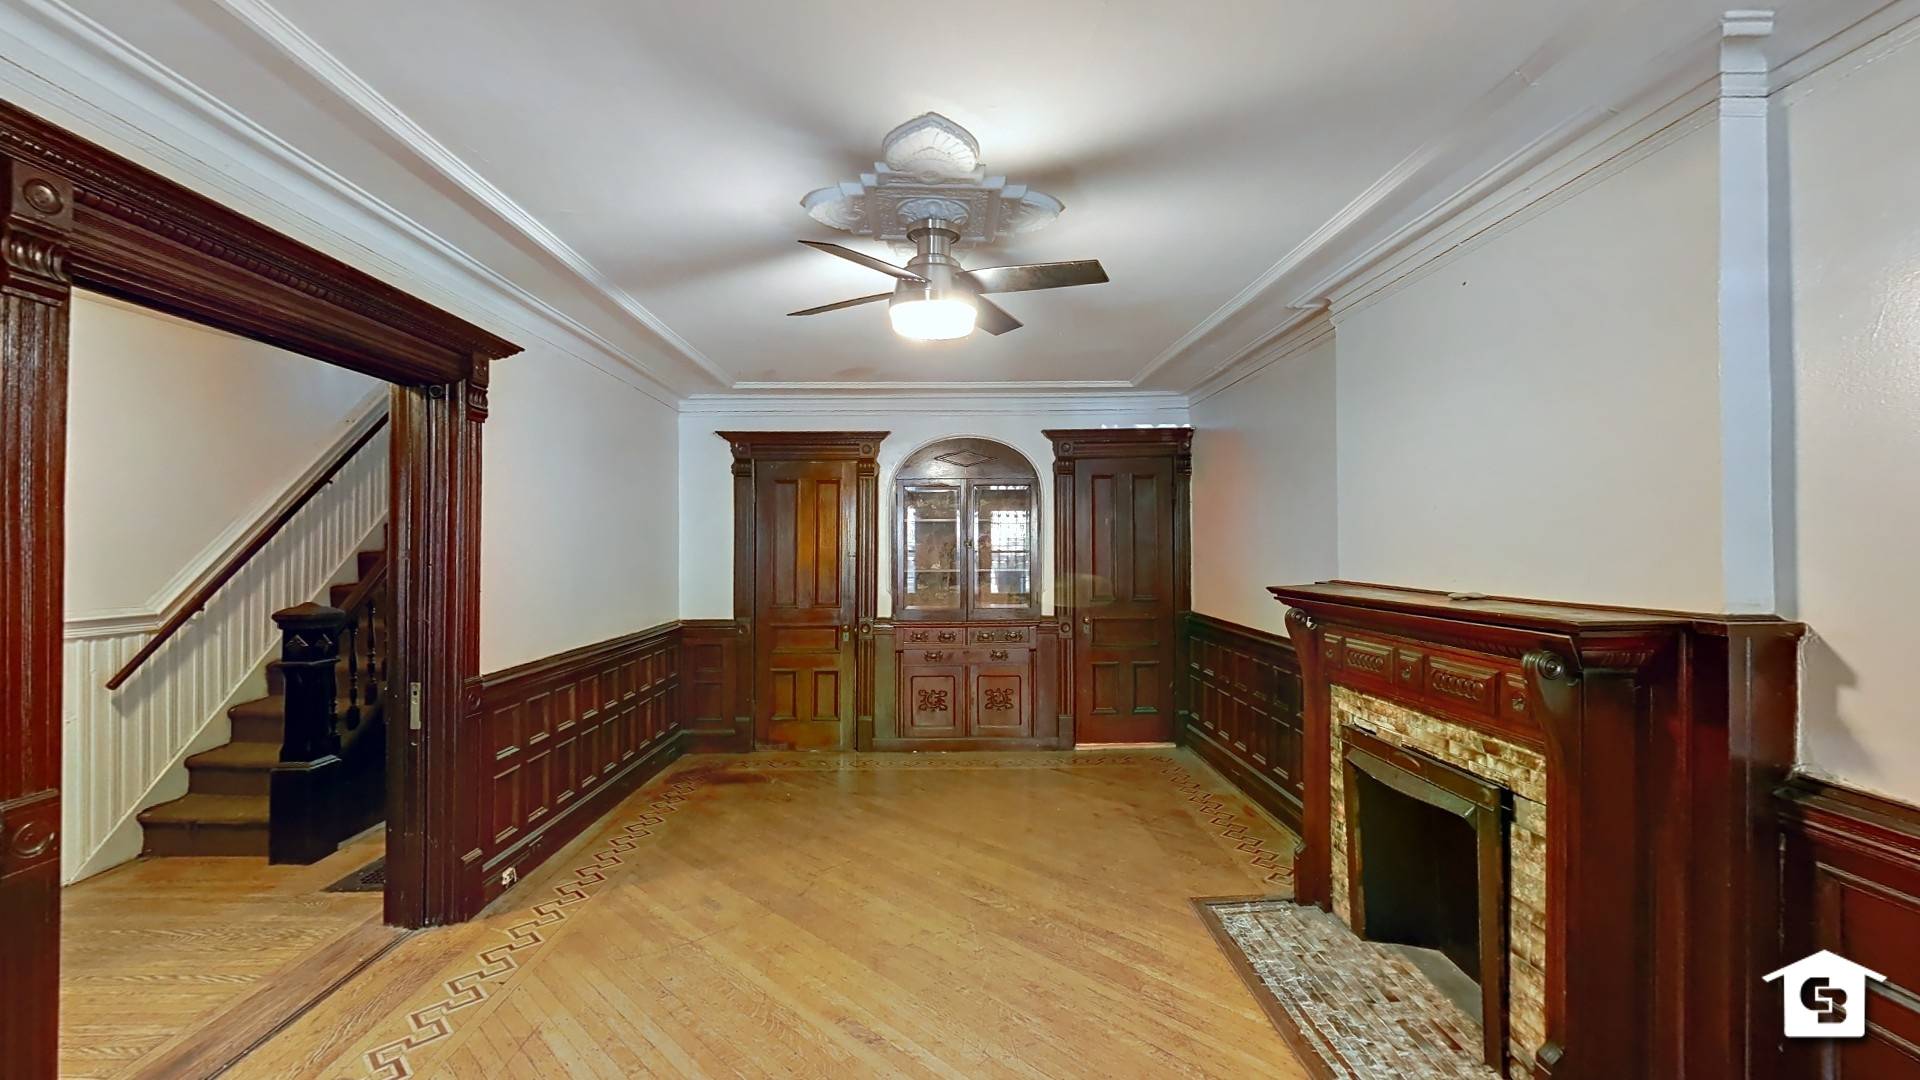 Circa 1899, this grand two family brownstone is ideally set on a beautiful landmark tree lined street in the historic Bedford Stuyvesant section of Brooklyn.